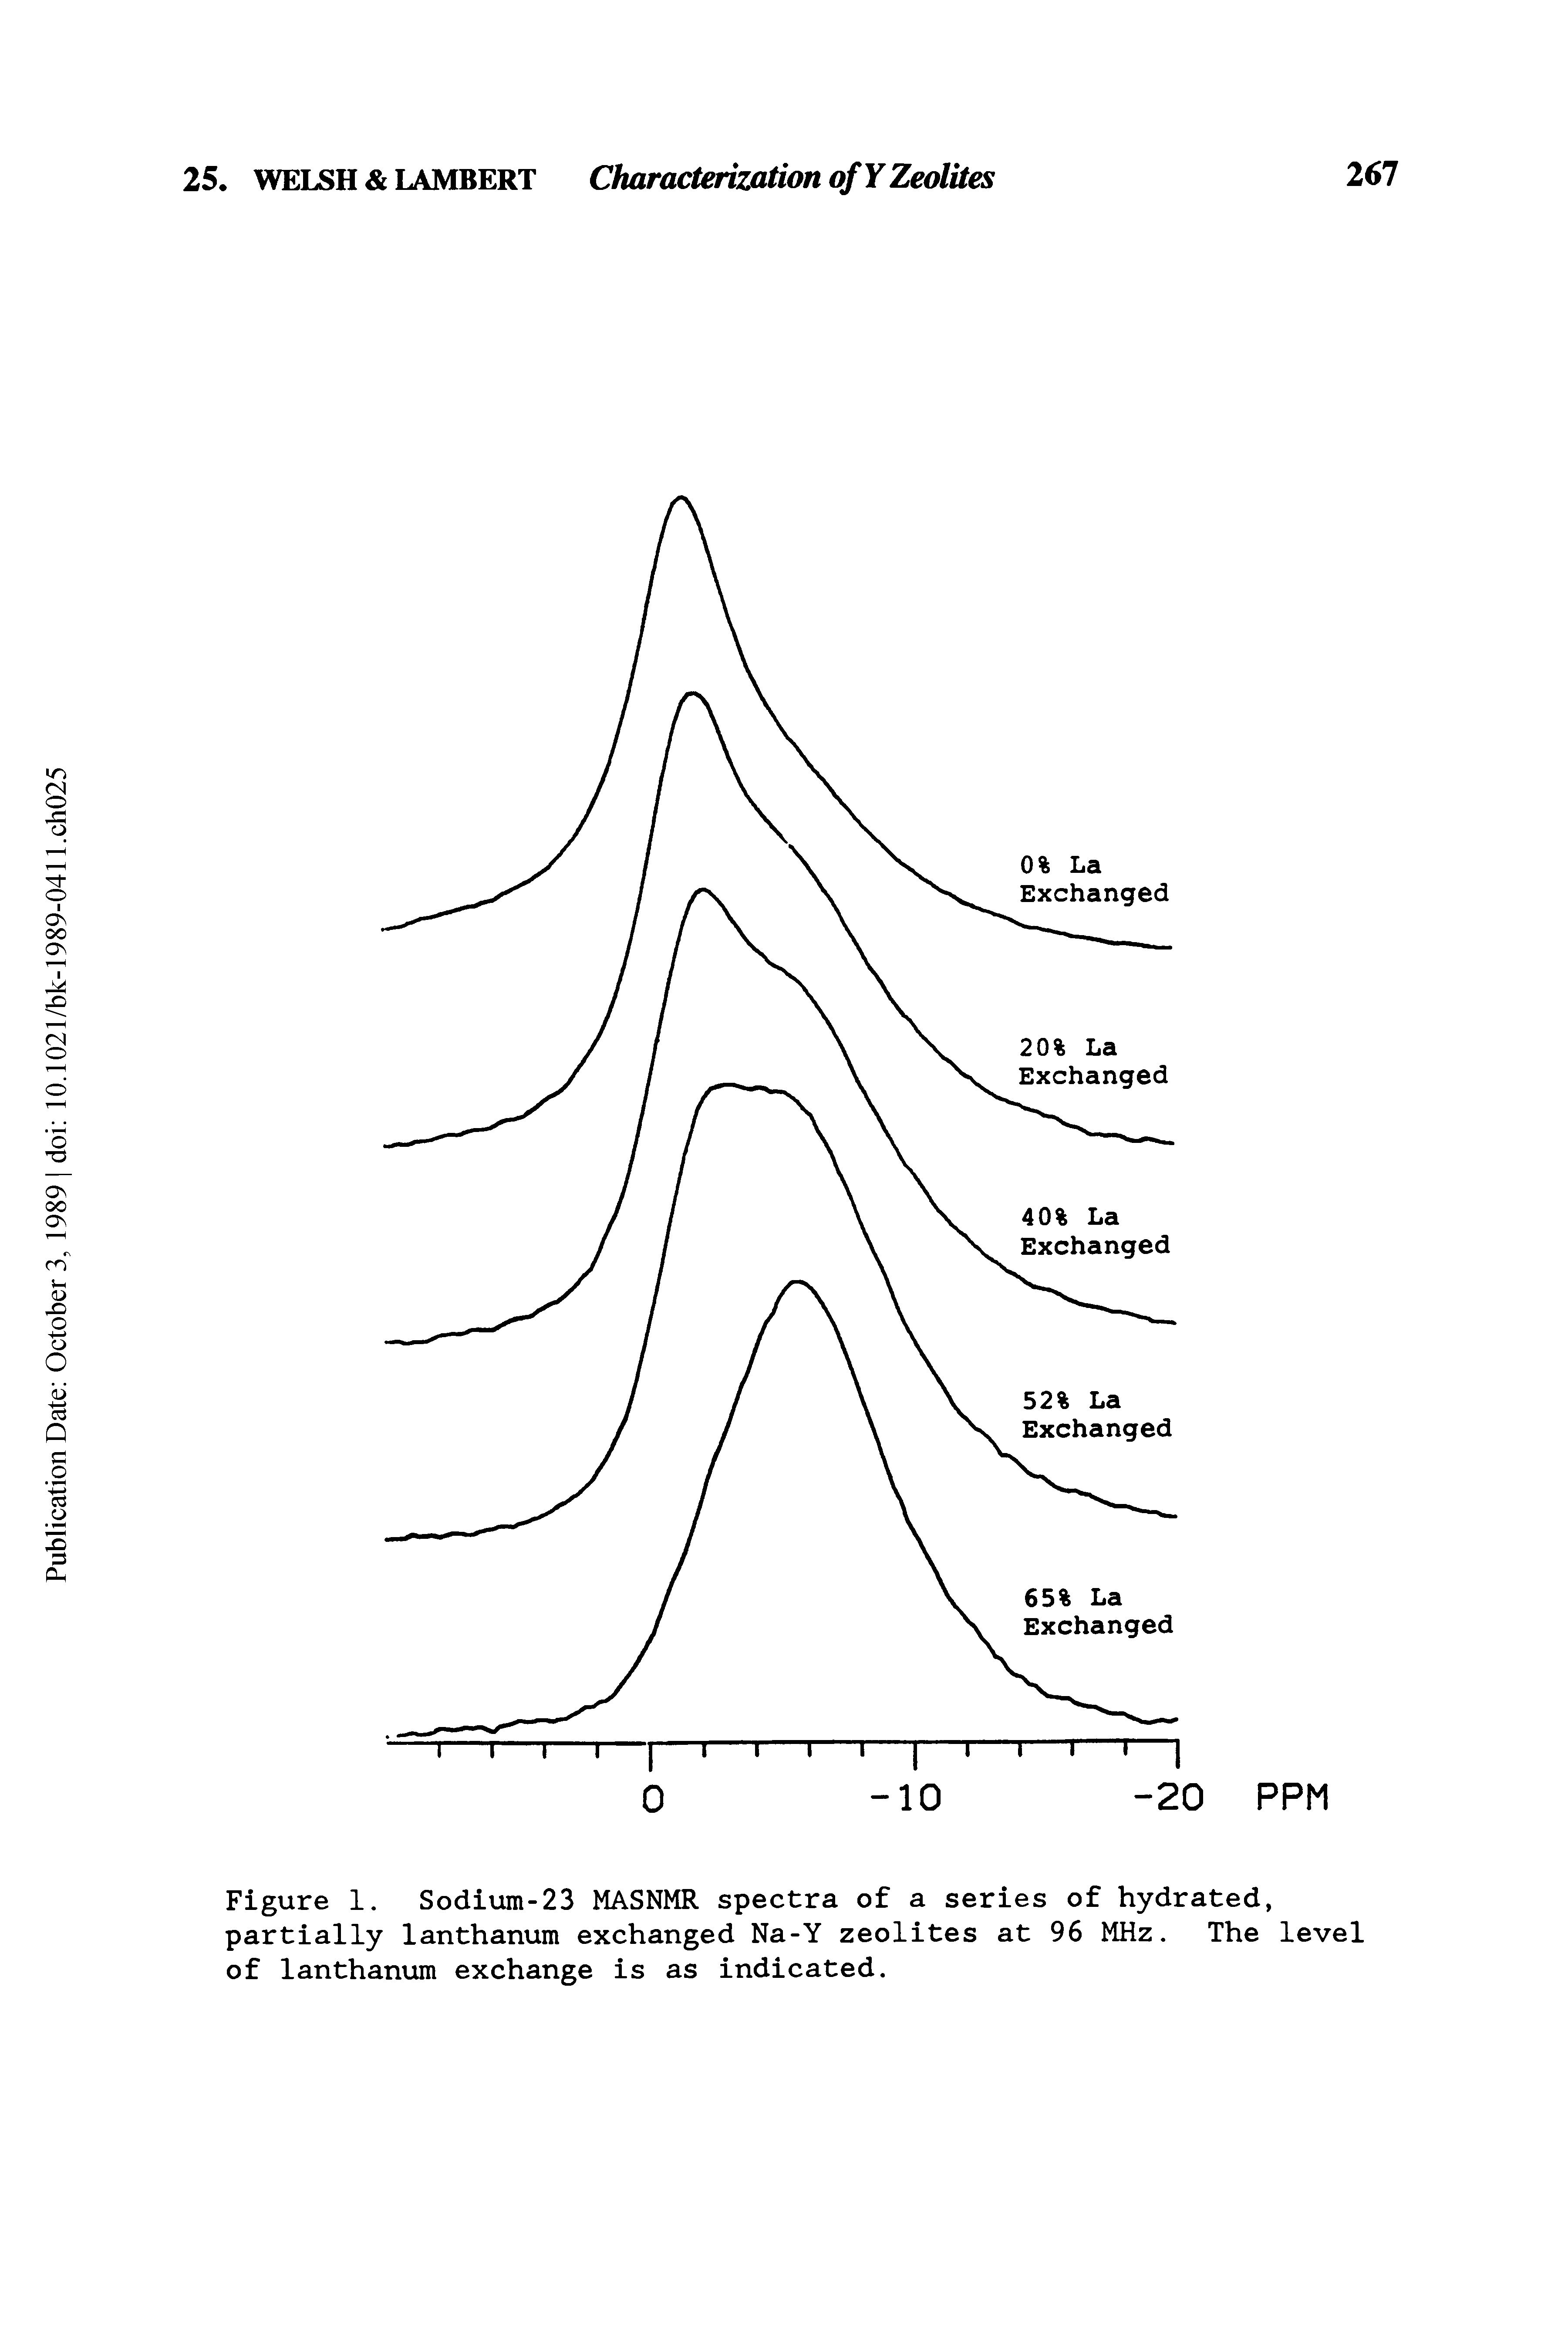 Figure 1. Sodium-23 MASNMR spectra of a series of hydrated, partially lanthanum exchanged Na-Y zeolites at 96 MHz. The level of lanthanum exchange is as indicated.